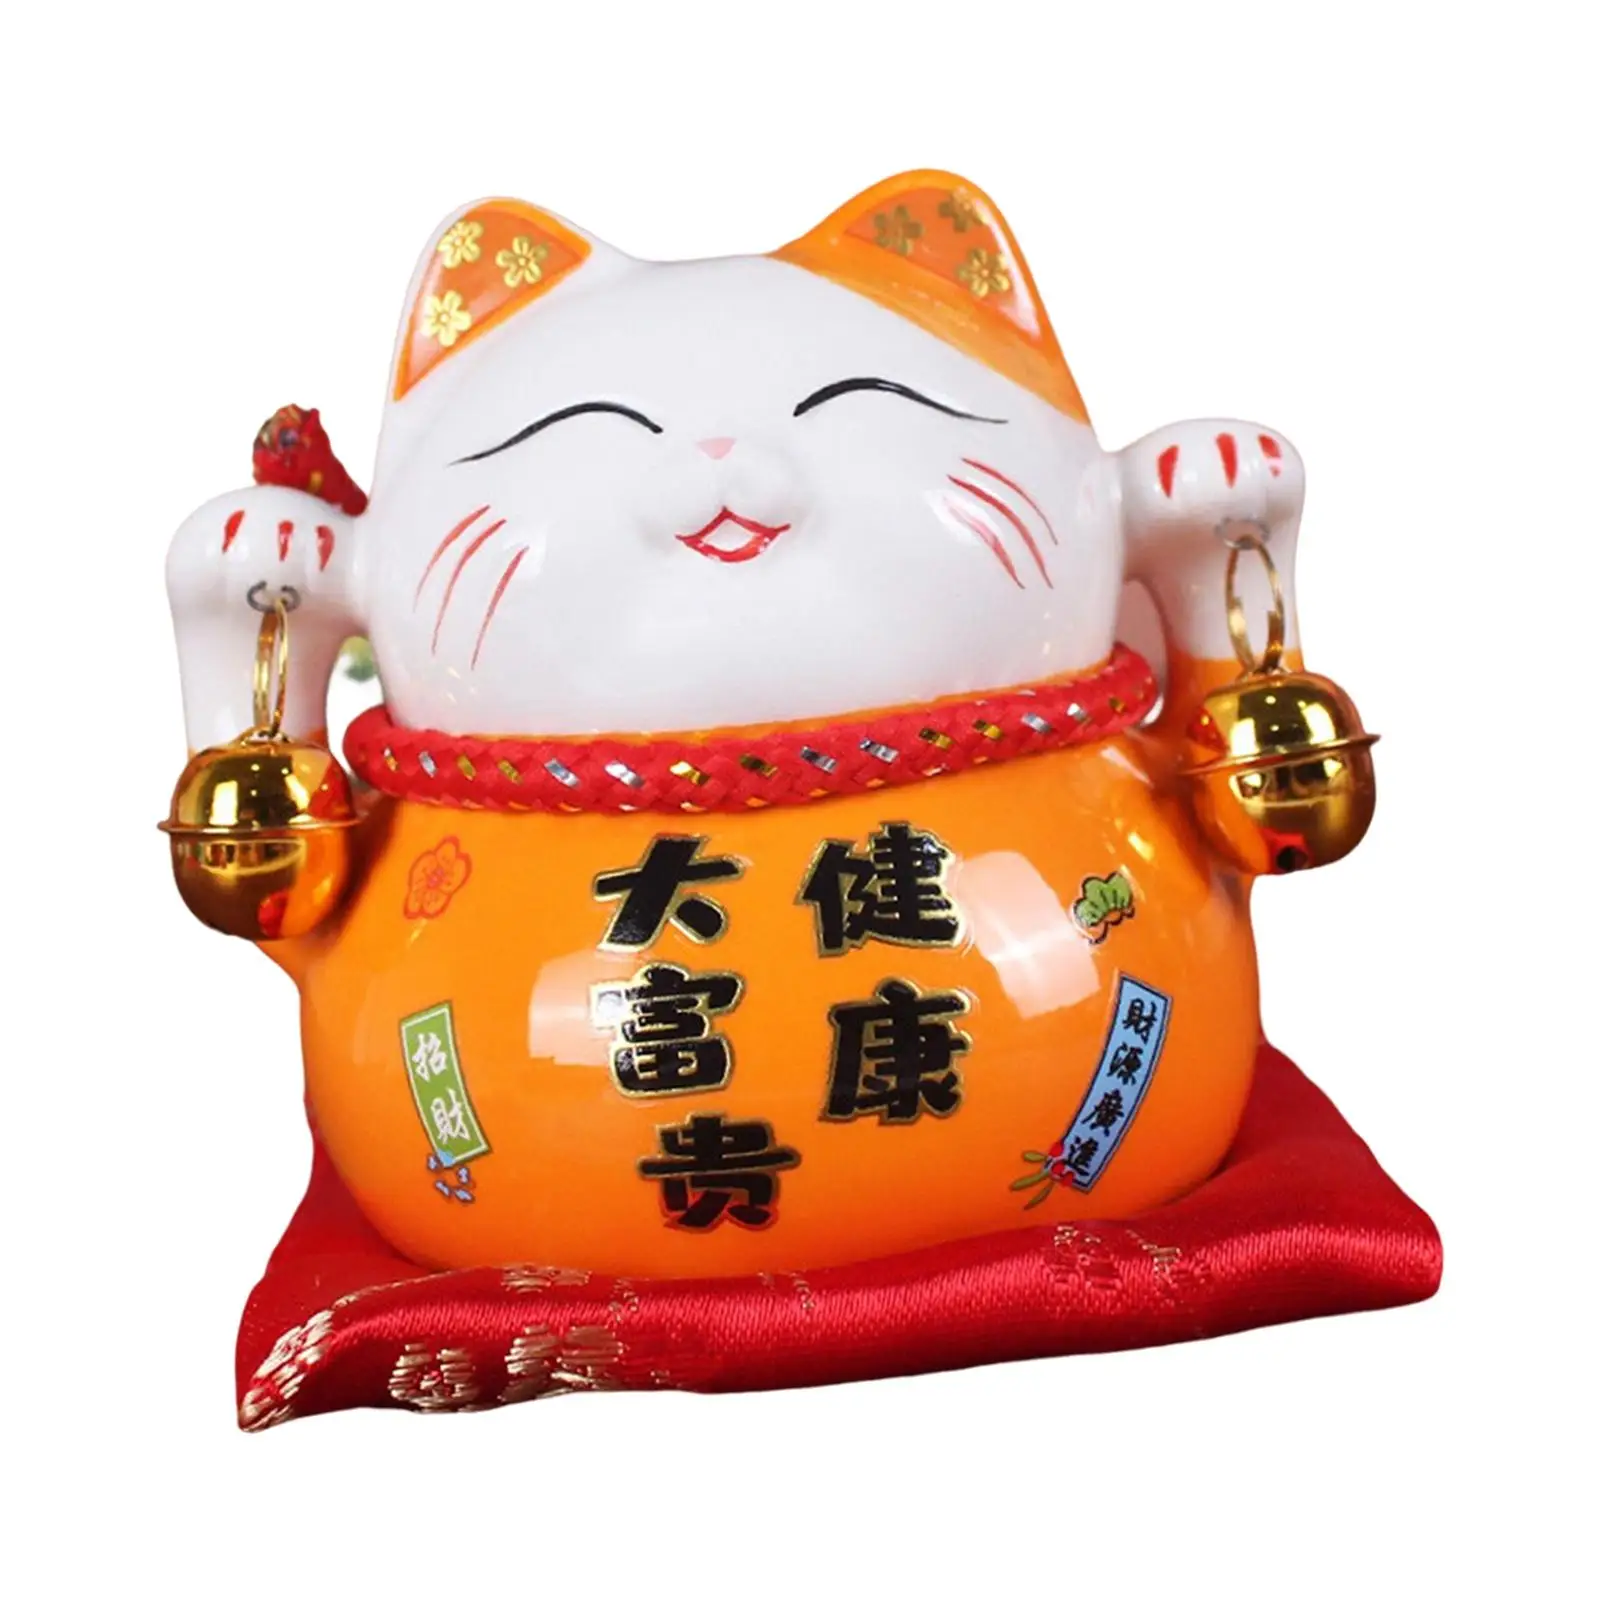 Lovely Lucky Cat Money Bank Animal Statue Money Saving Box Ornaments with Two Bells Crafts Toys for Table Birthday Gift Office